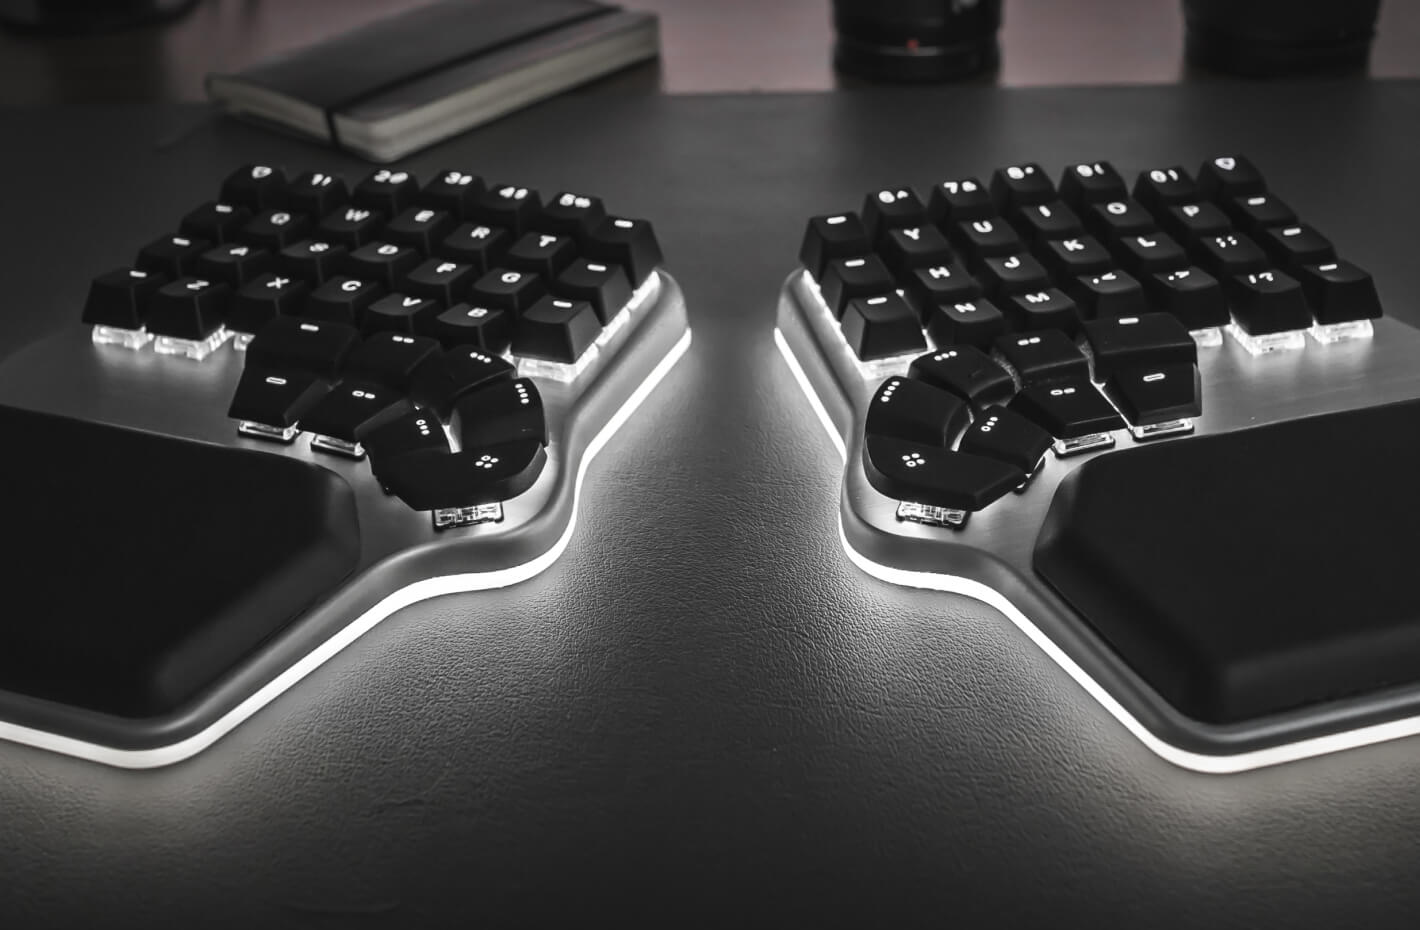 Defy Keycaps and Palm Pads Bundle